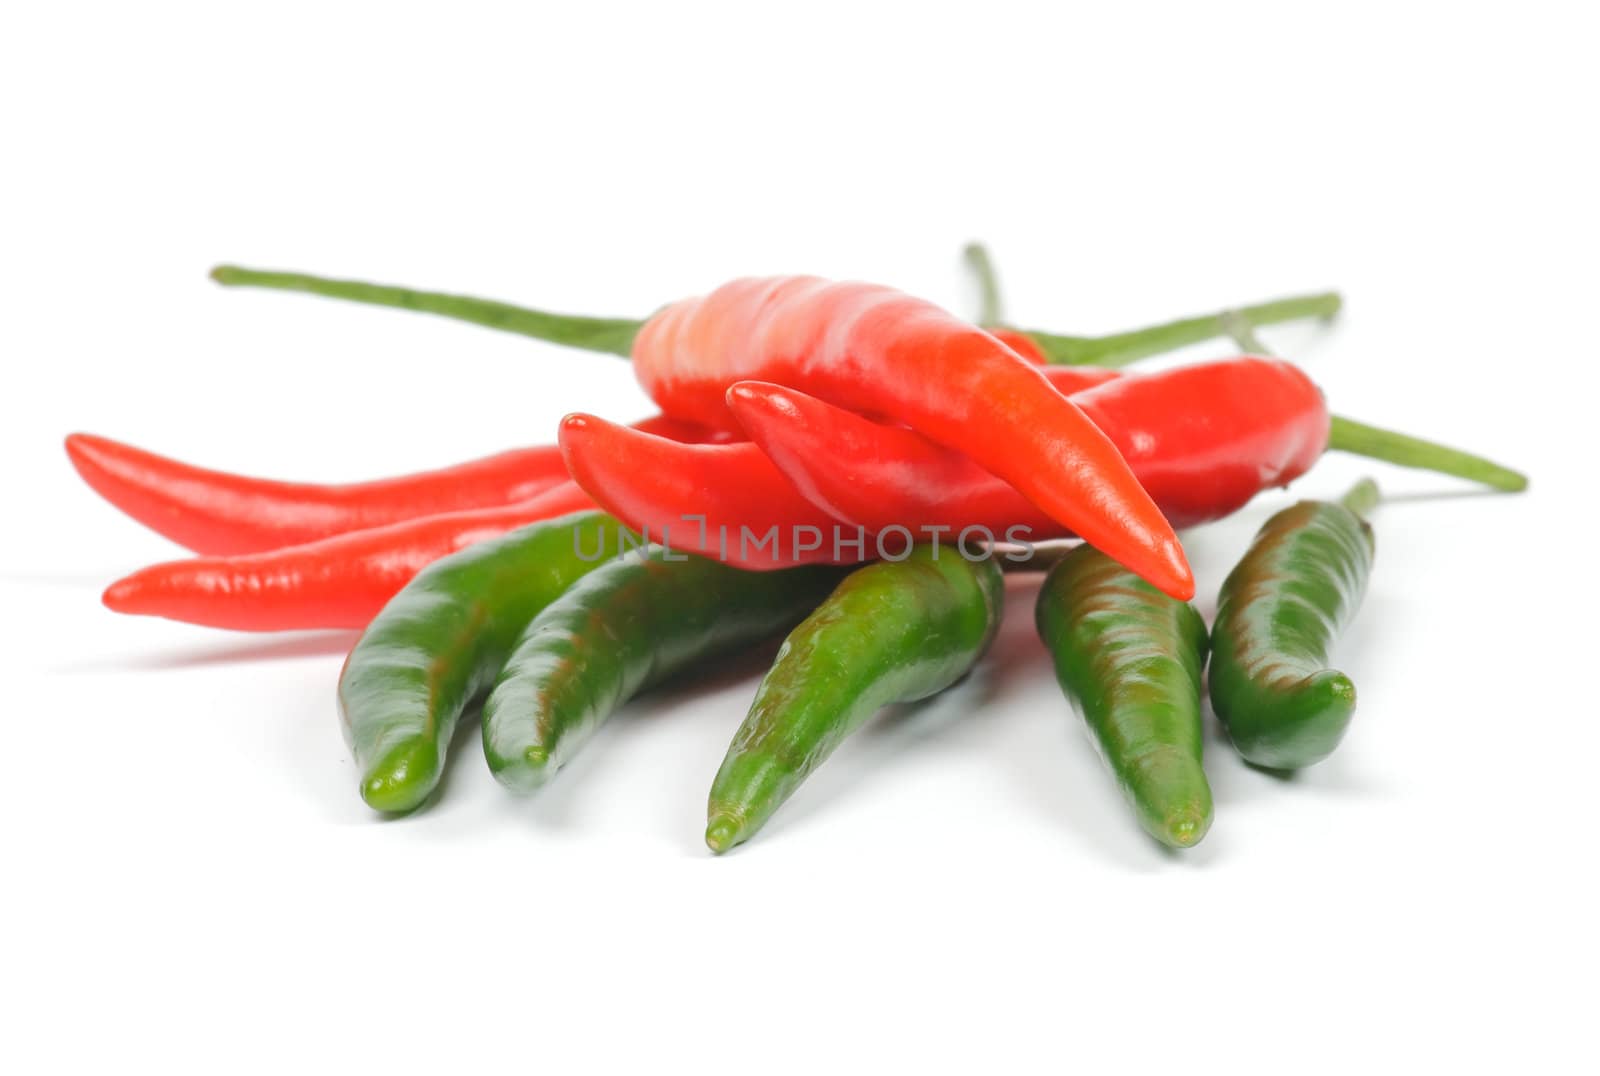 Arrangement of green and red chili peppers isolated in white background